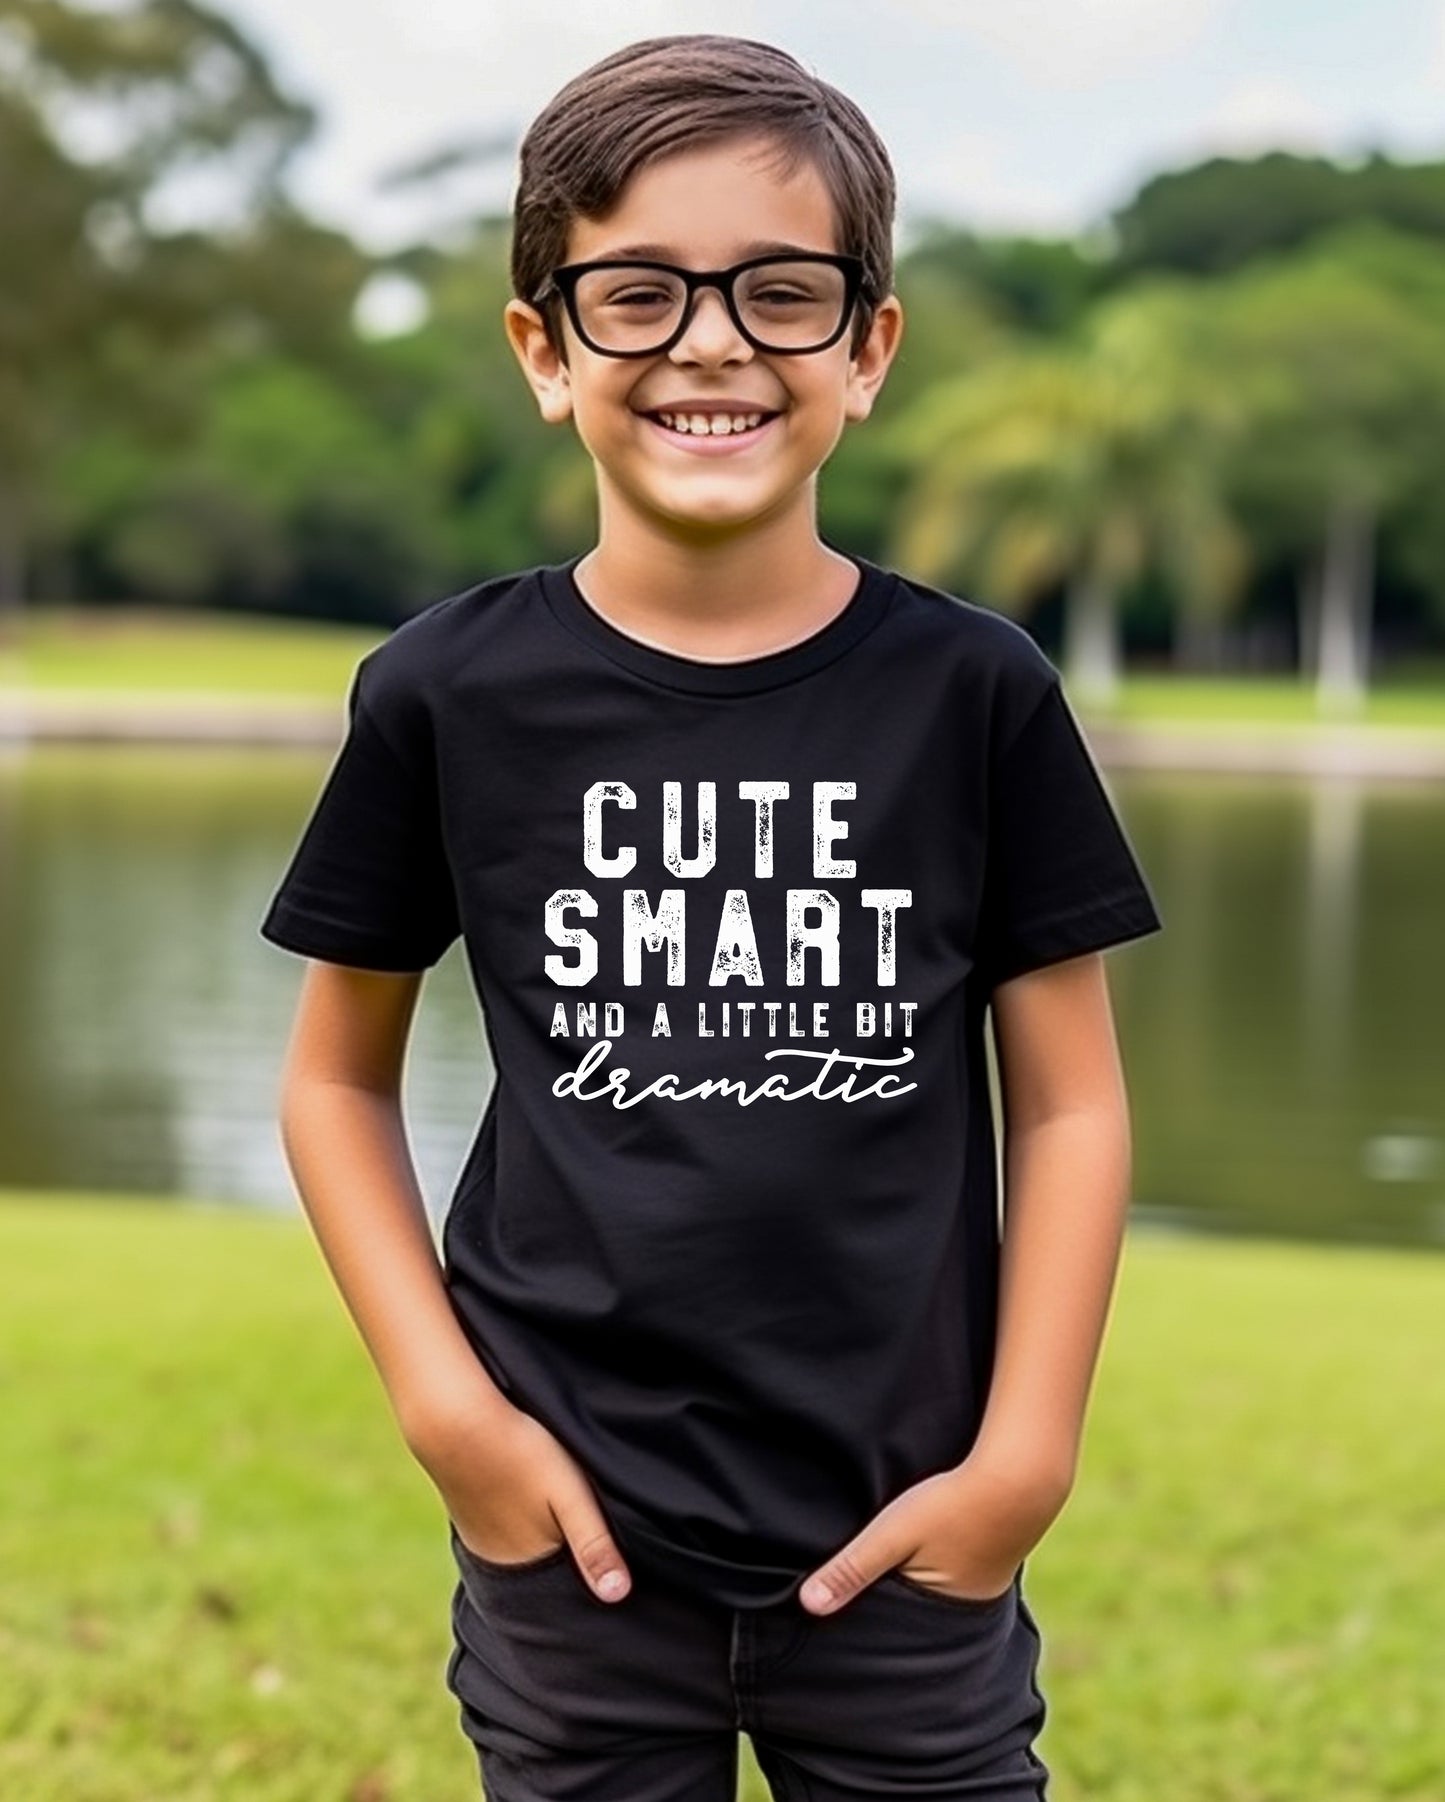 Cute Smart - Youth/Toddler